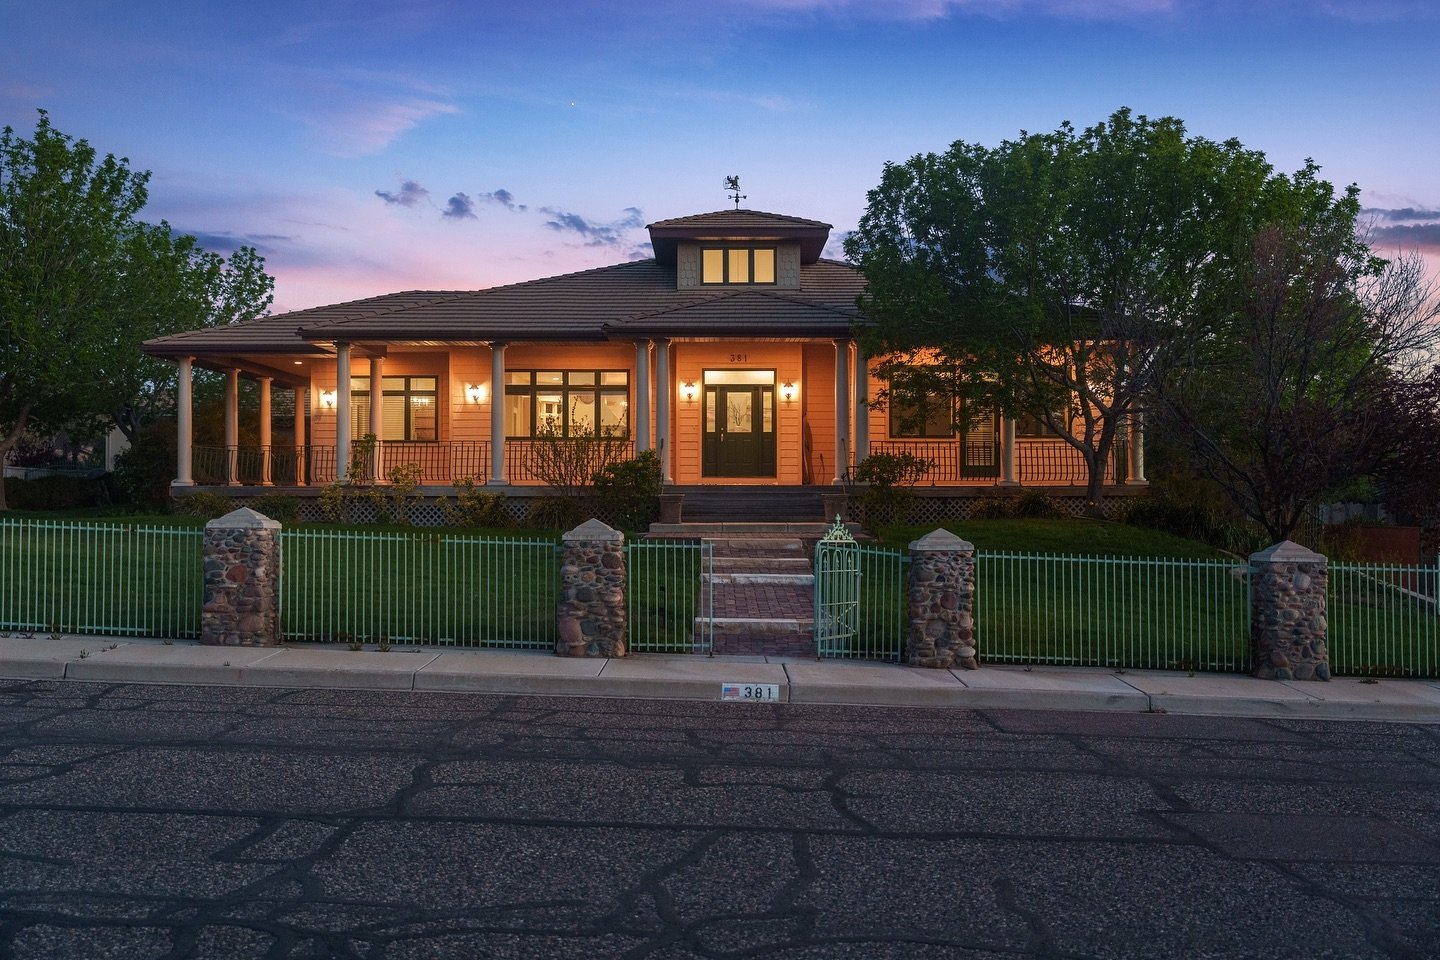 Twilights are a big hit! Especially this time of the year as weather is great and everything is green🍃🌅

Listed/sold by: @marisa_your_utrealtor 
Brokered by: @utahseliterealtors 

Ask us about our twilight services! To book you can visit the link i